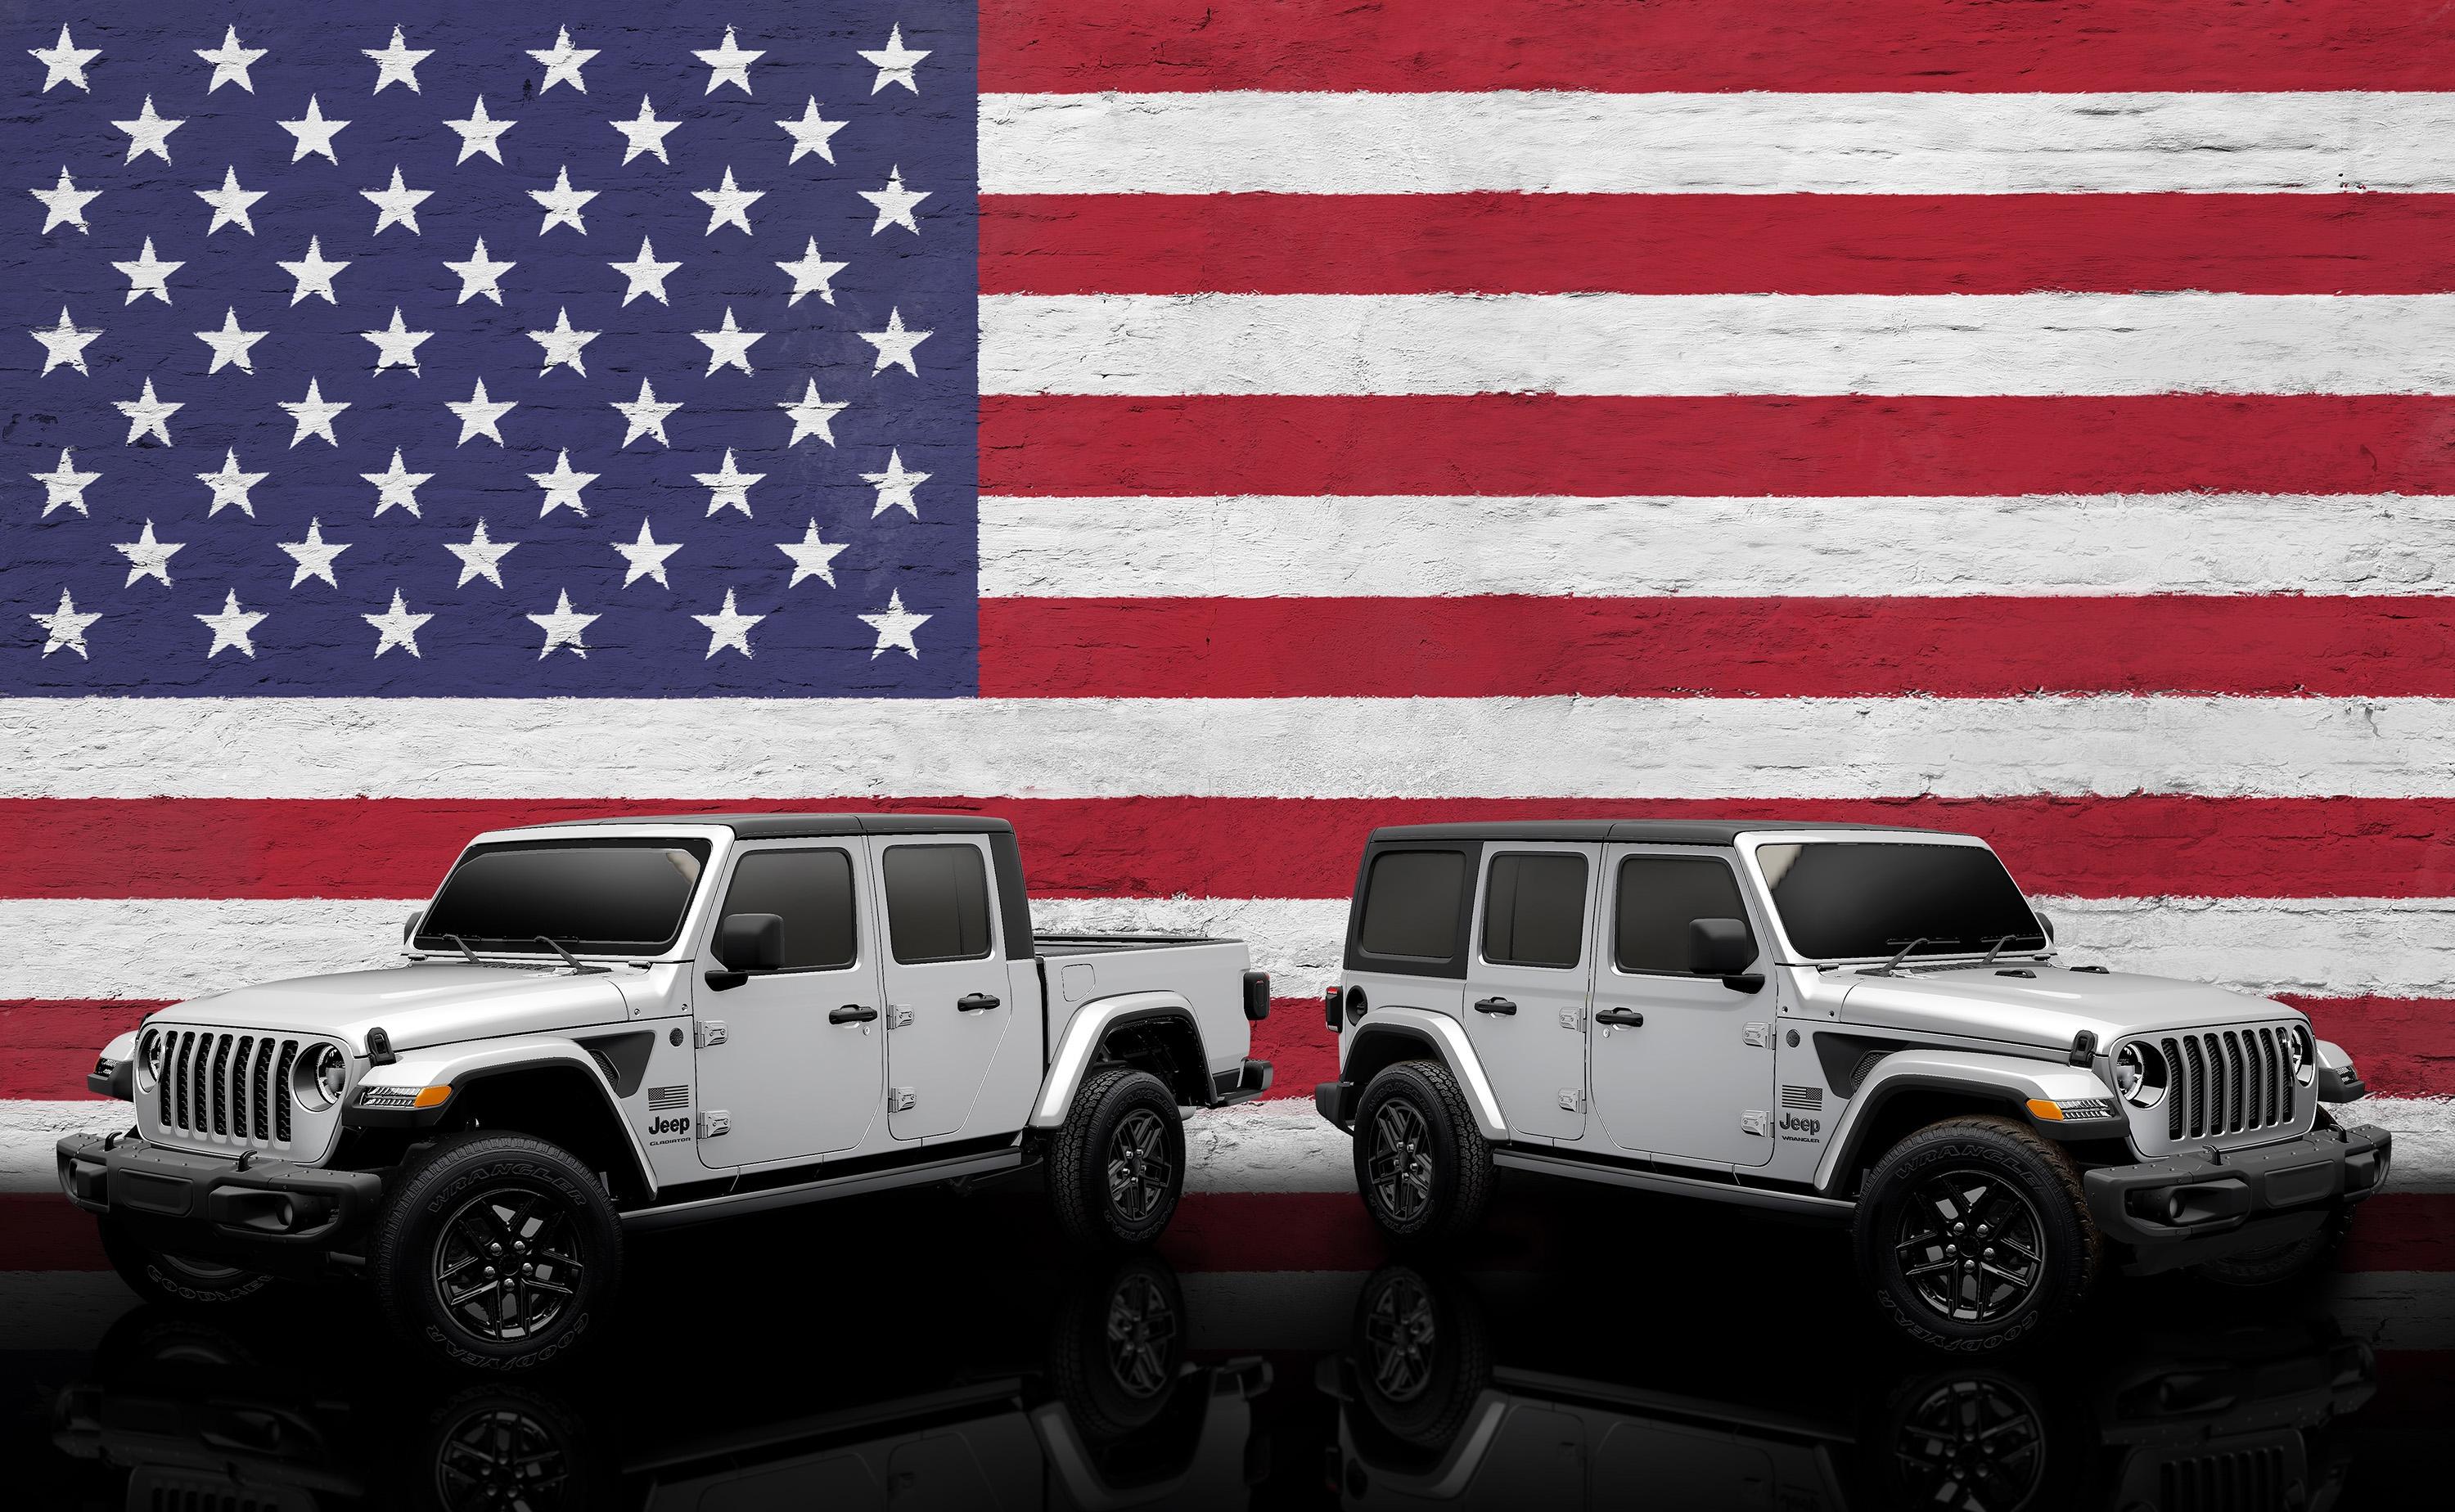 Toyota Compact Cruiser 🇺🇸 Pride and Honor – Jeep Recognized for 22nd Consecutive Year as America’s Most Patriotic Brand; Renews Long-standing Partnership With USO d7d8fe6e-bb7c-40e8-baab-7361b4a24add-jpe